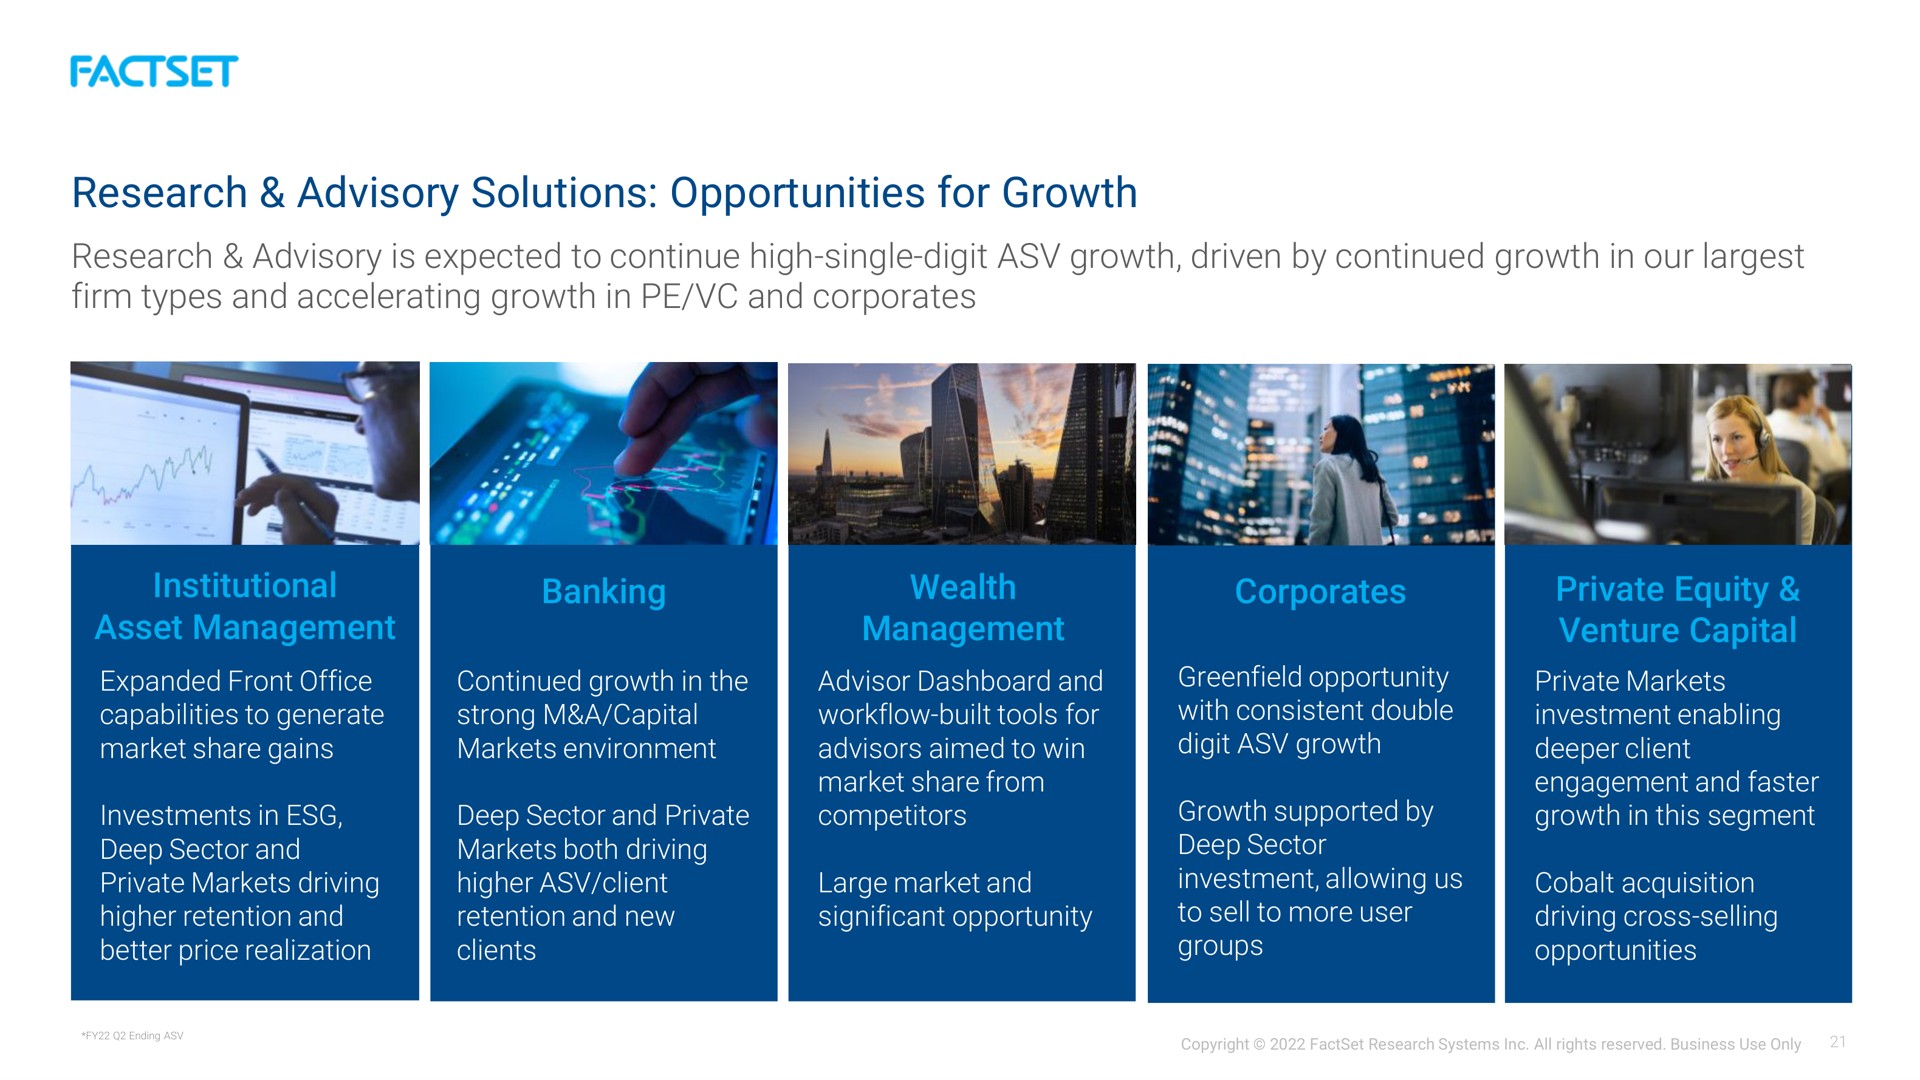 research advisory solutions opportunities for growth | Factset